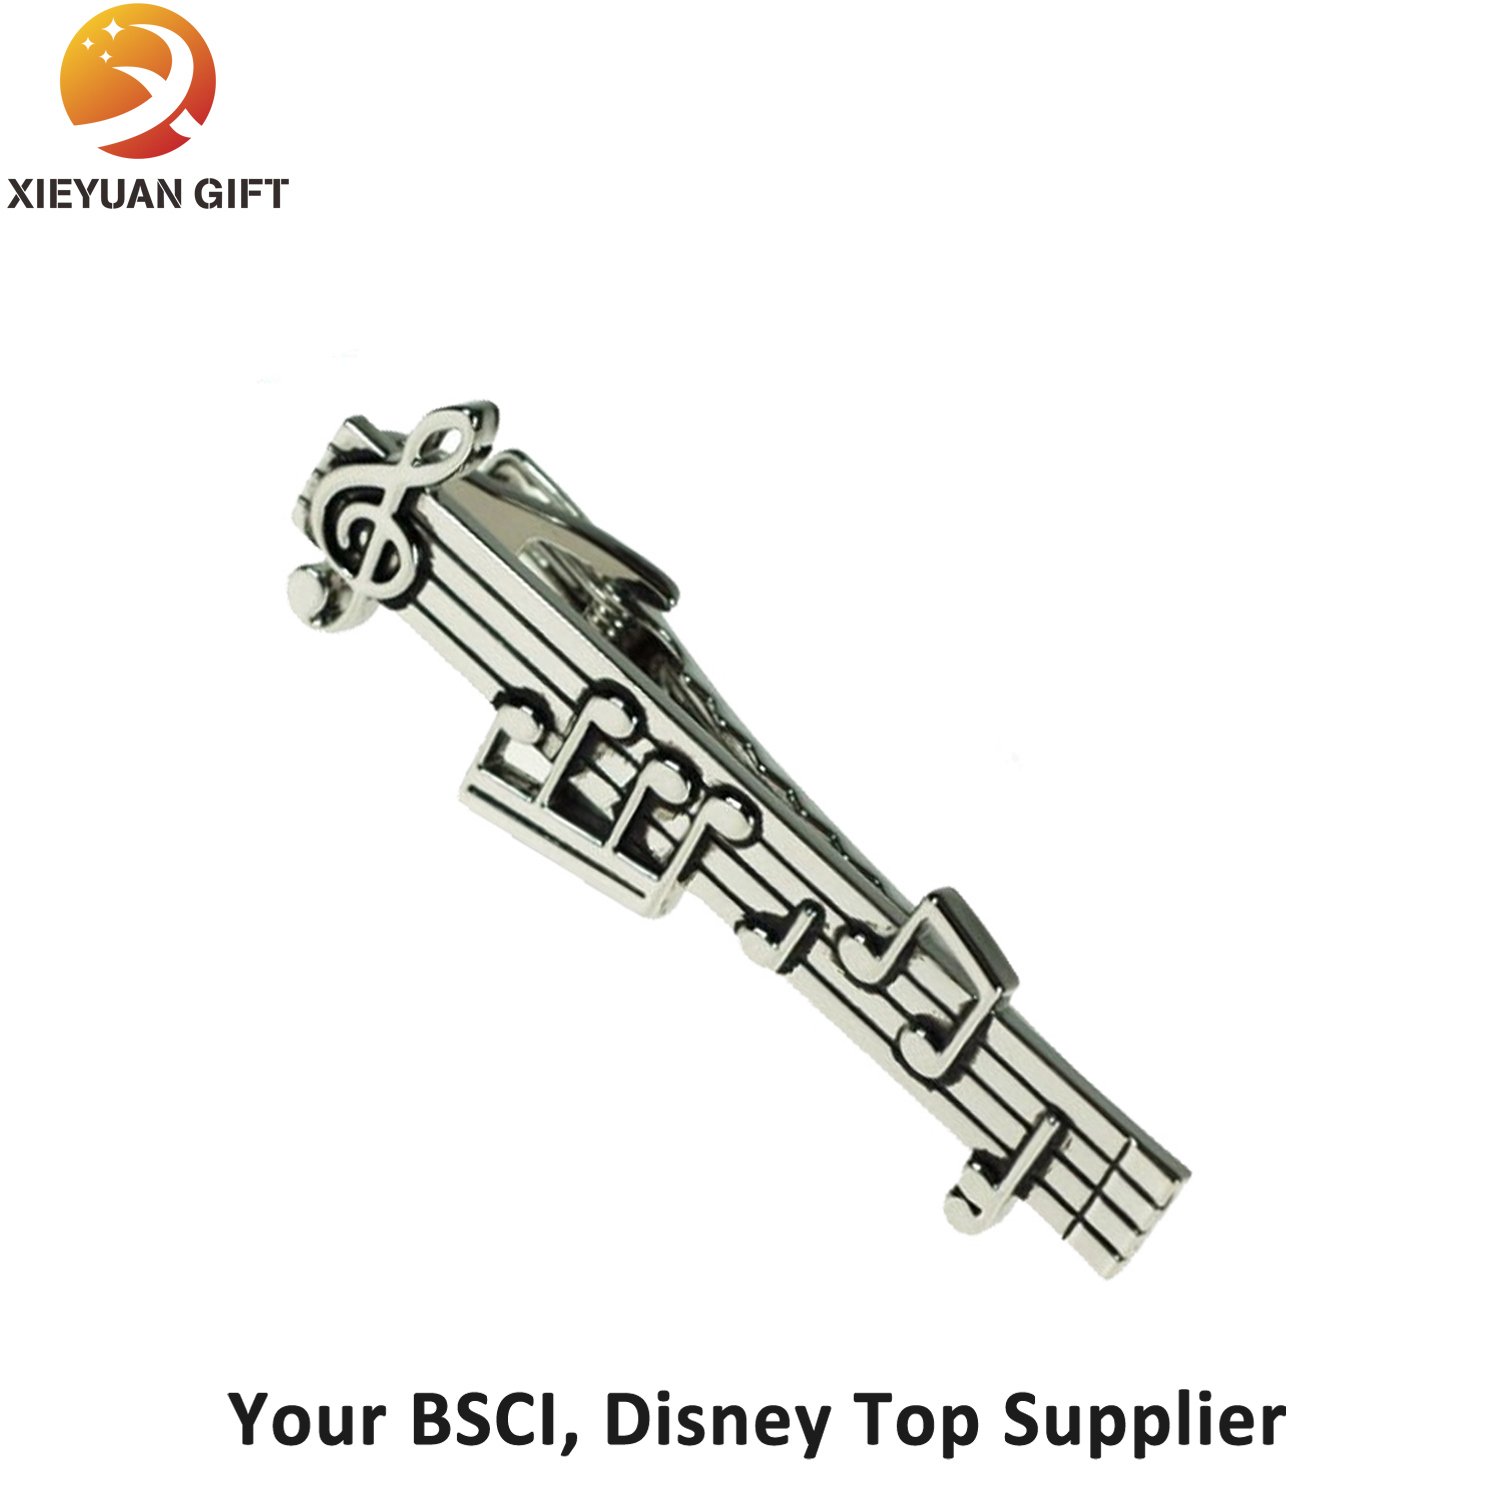 China Wholesale Rose Gold Tie Clip for Business Gifts